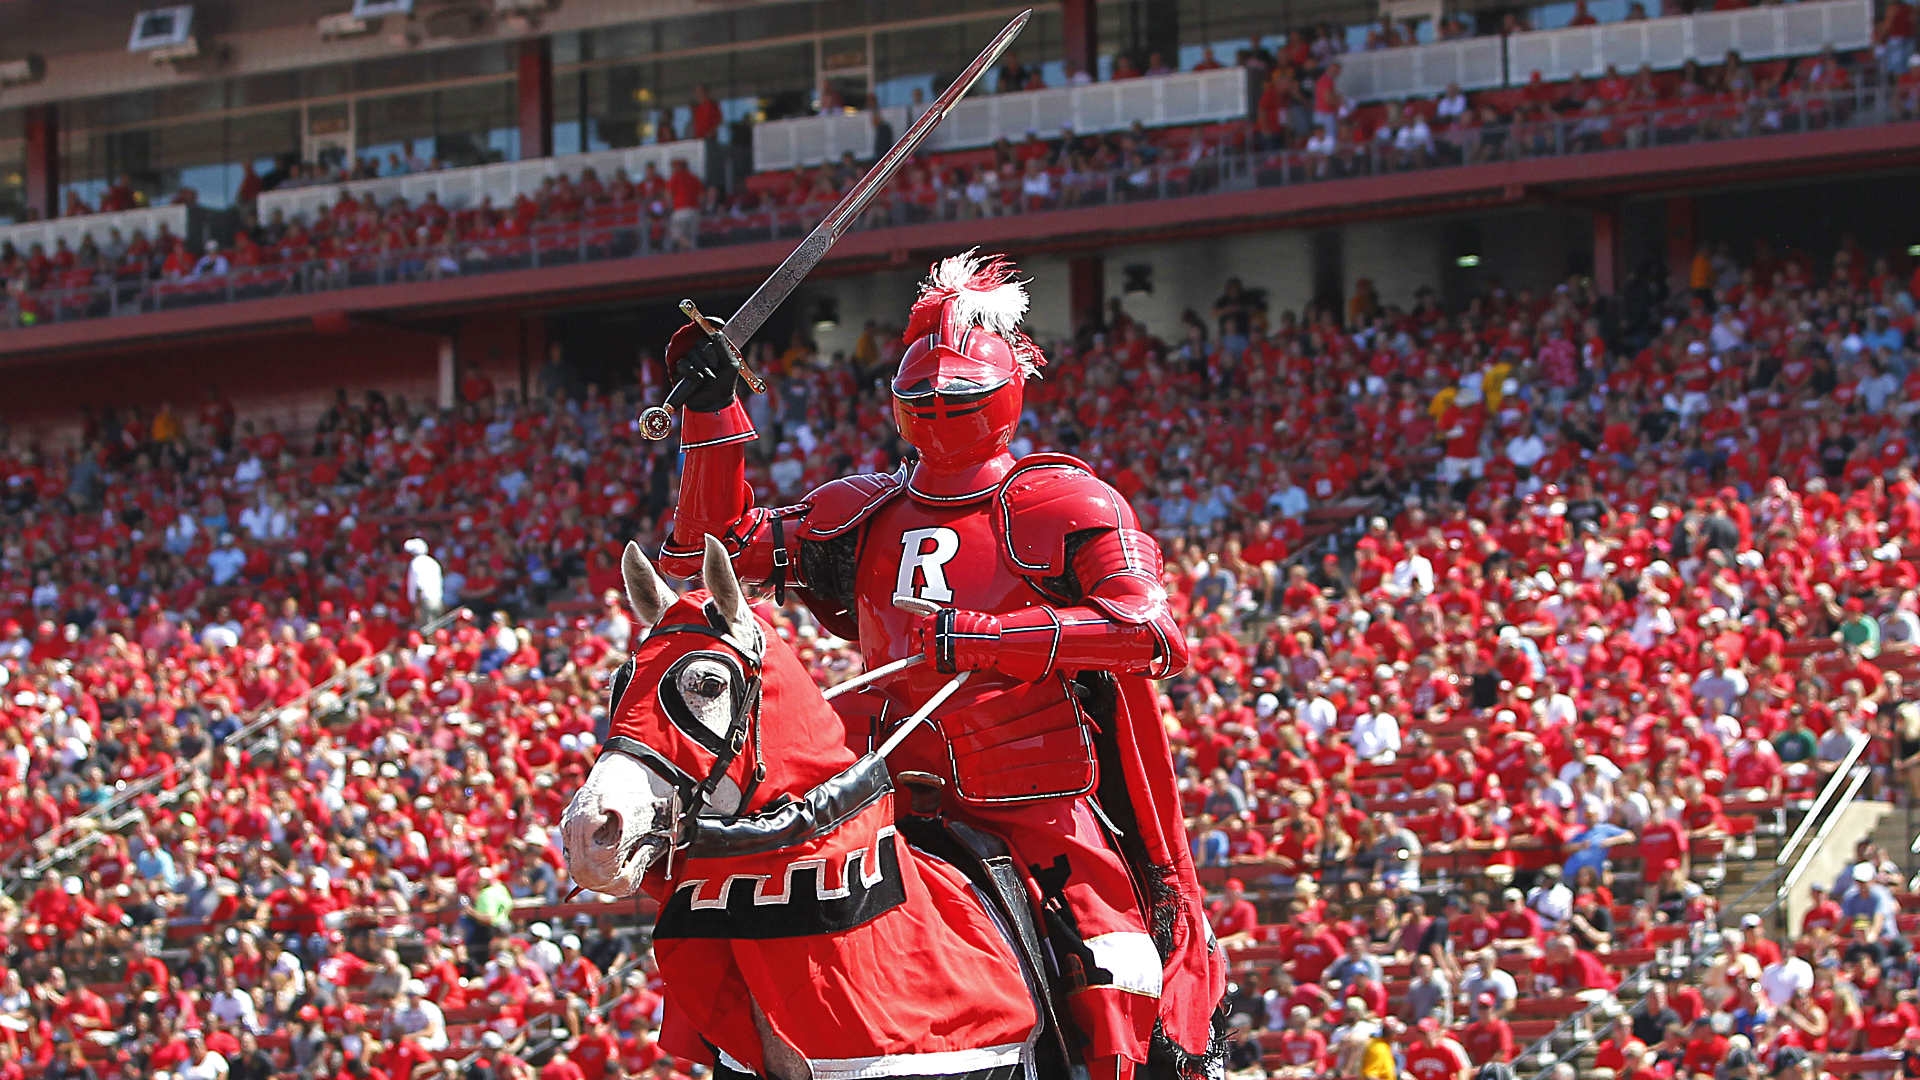 Worth a shot: 19-year-old Rutgers student applies to be football coach